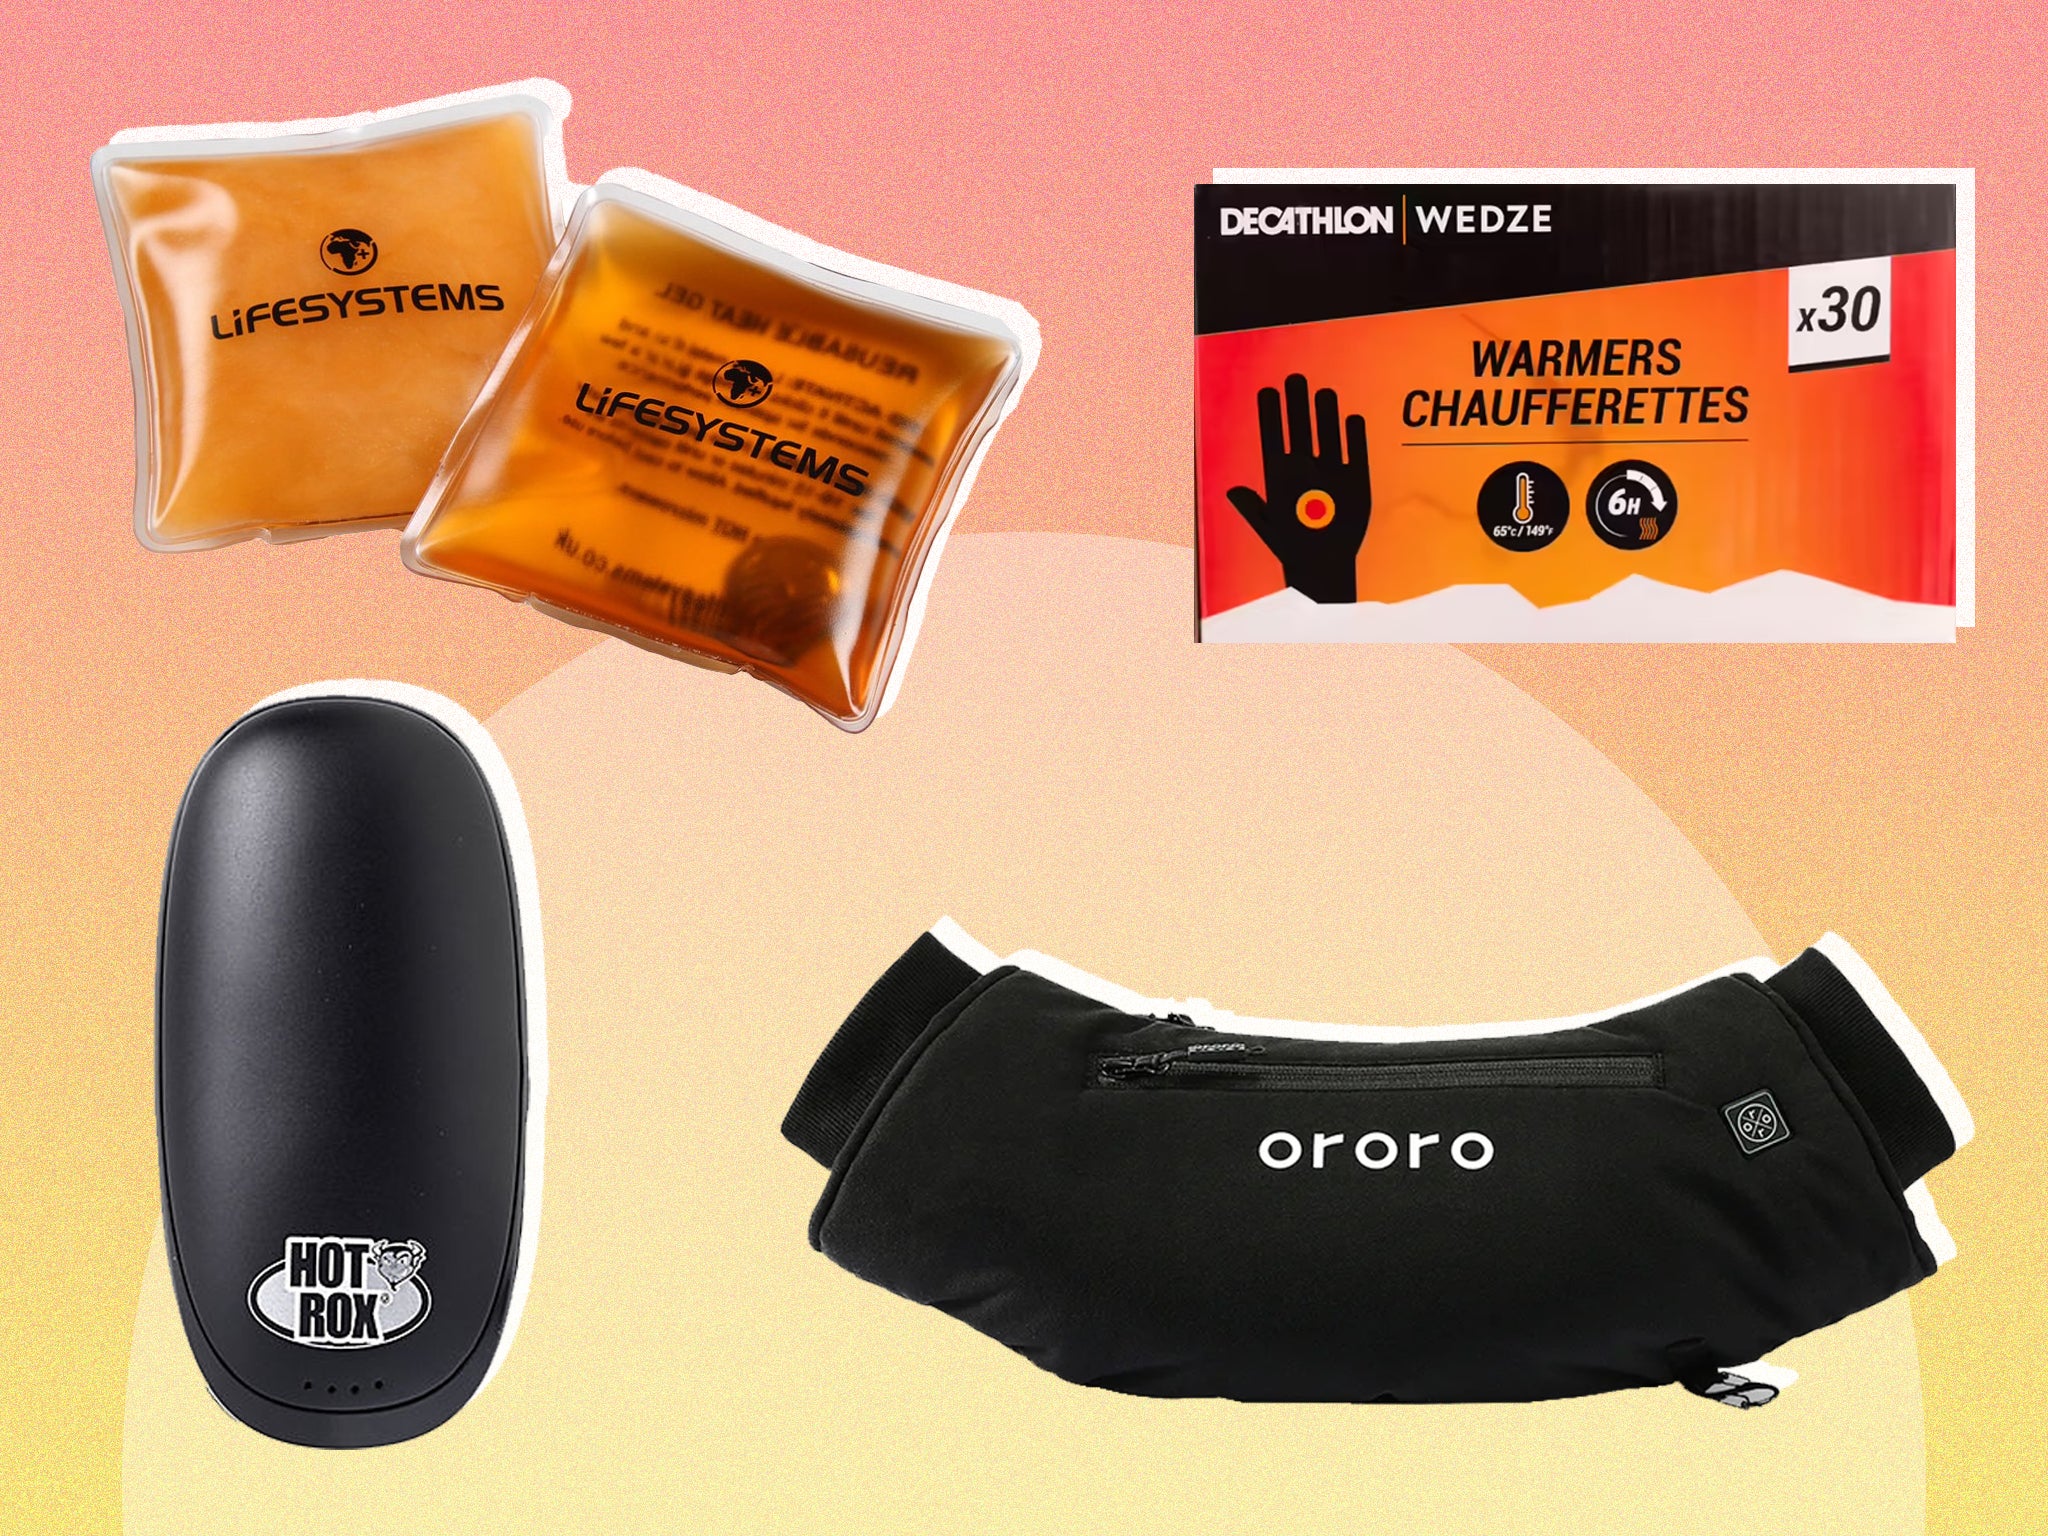 Where to buy hand warmers: Rechargeable and single-use products